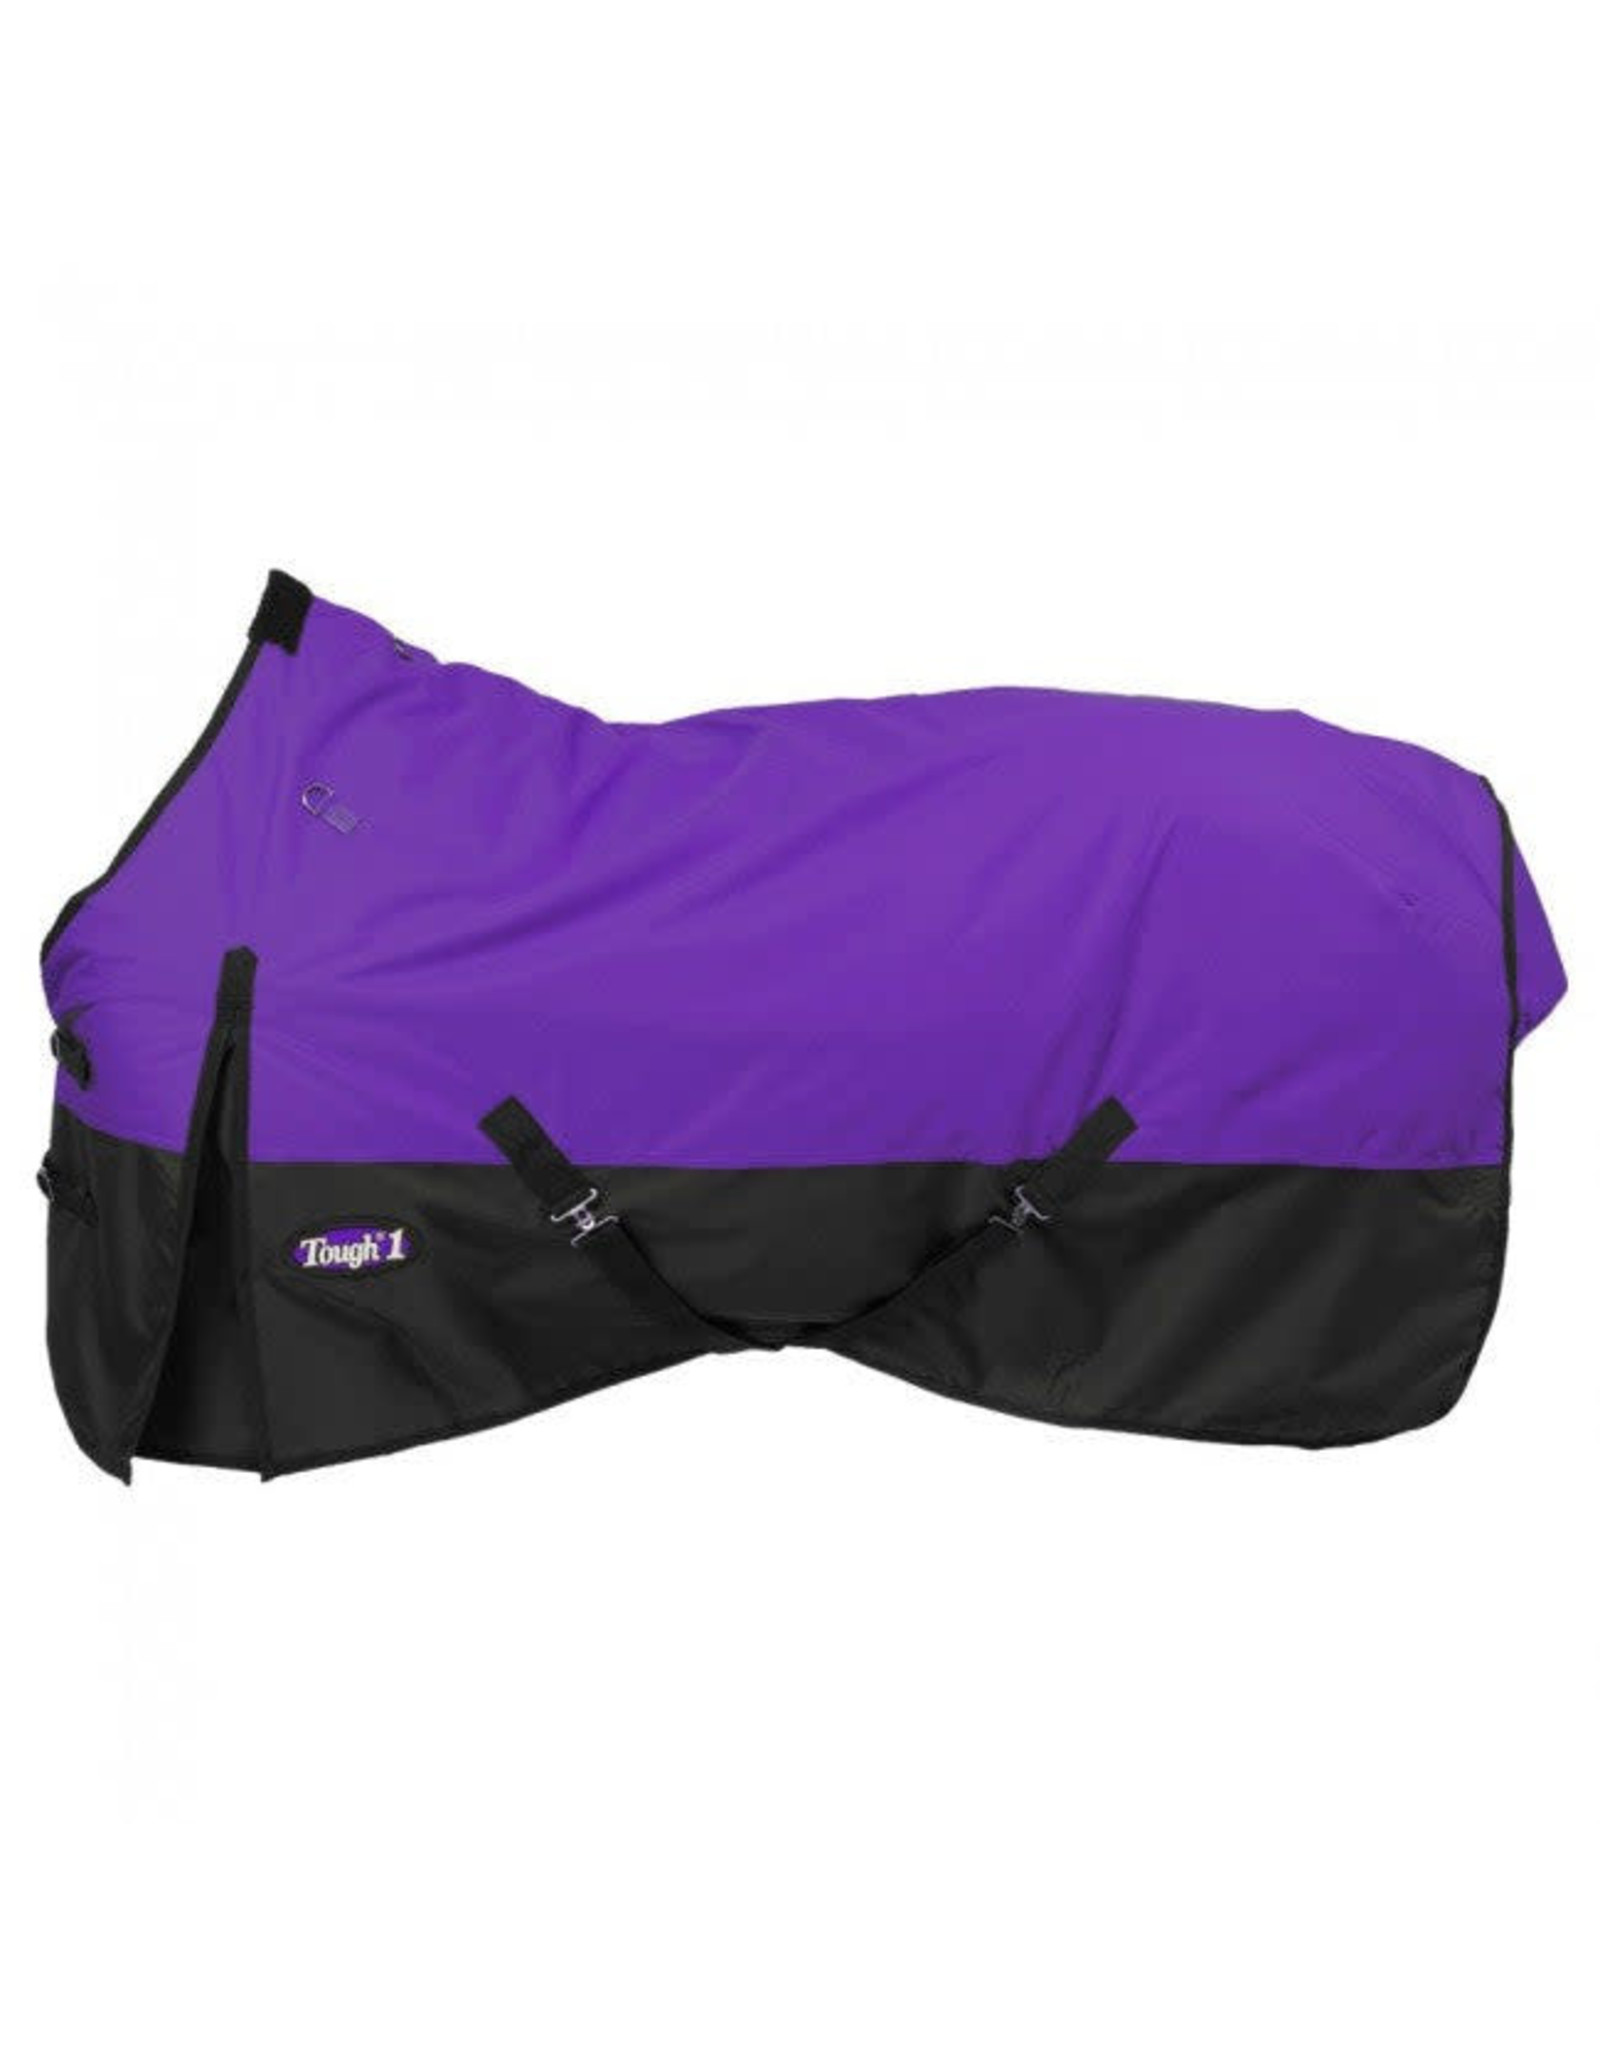 Tough 1 600D 250G Insulated Purple Turnout Blanket 32-2010S-10-75